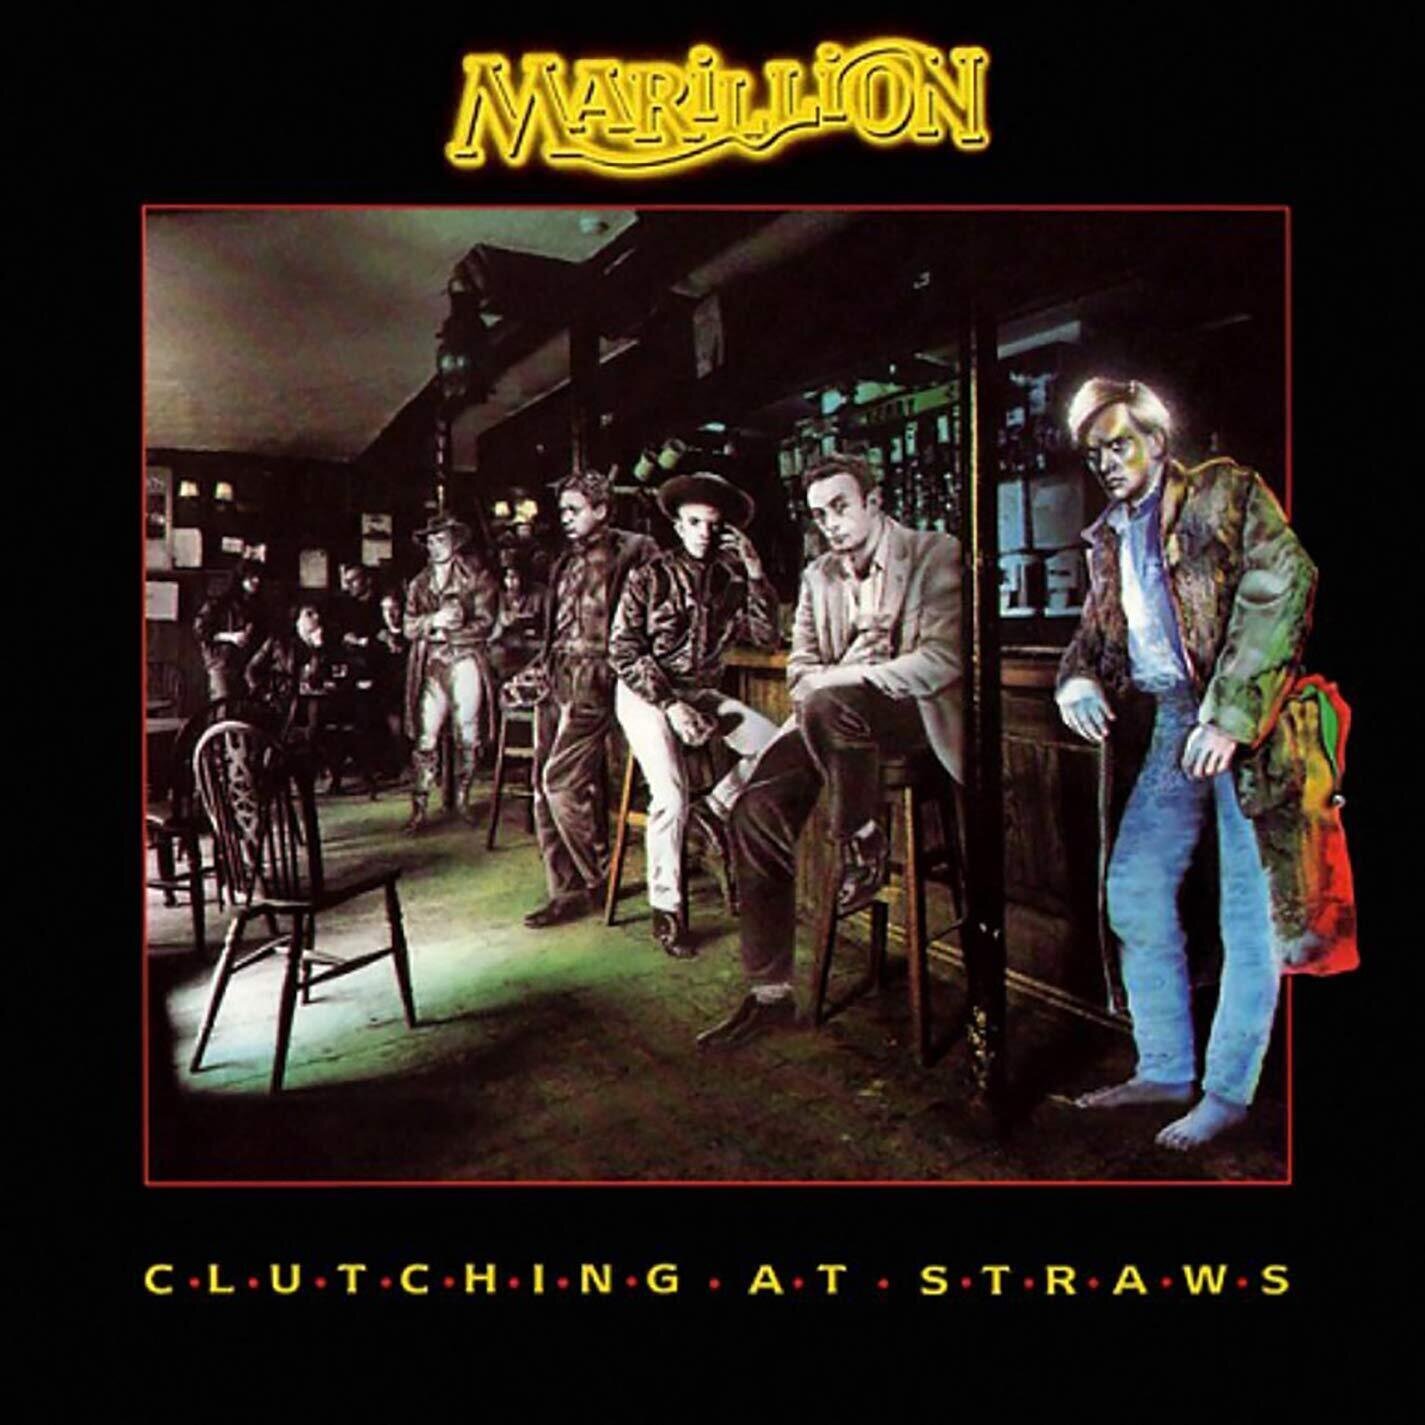 Vinyl Record Marillion - Clutching At Straws (Deluxe Edition) (5 LP)